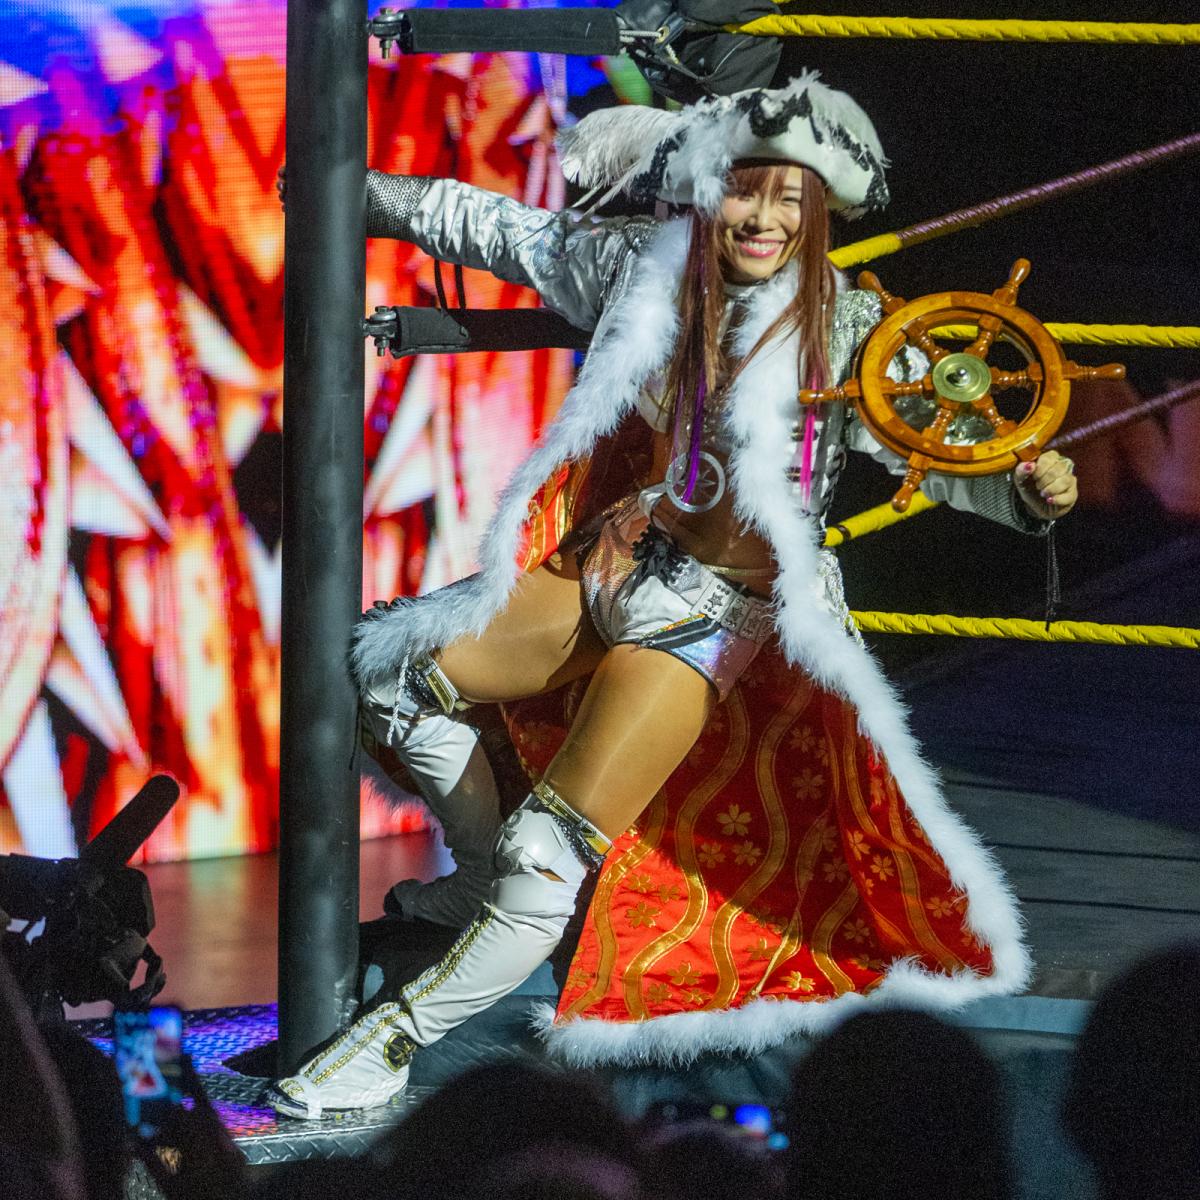 Celebrate the Career of Kairi Sane with Throwback Gallery